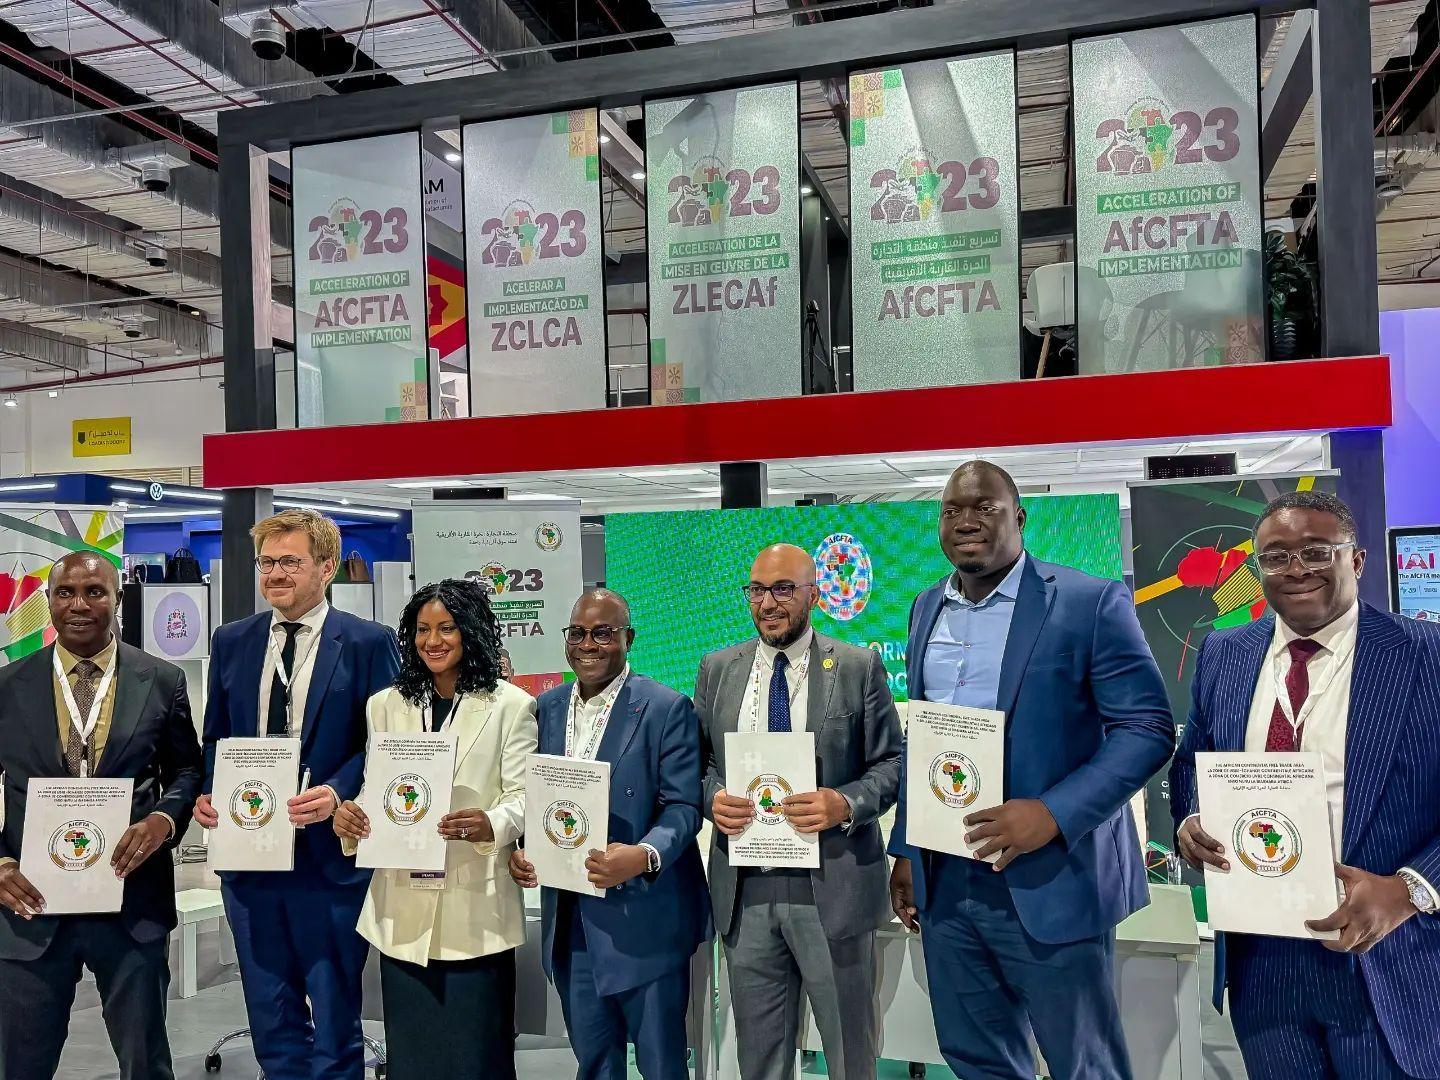 AFEX, other African Exchanges, Sign AfCFTA Association of Commodities Exchanges (A-ACX) to Advance Intra-African Commodities Trading.